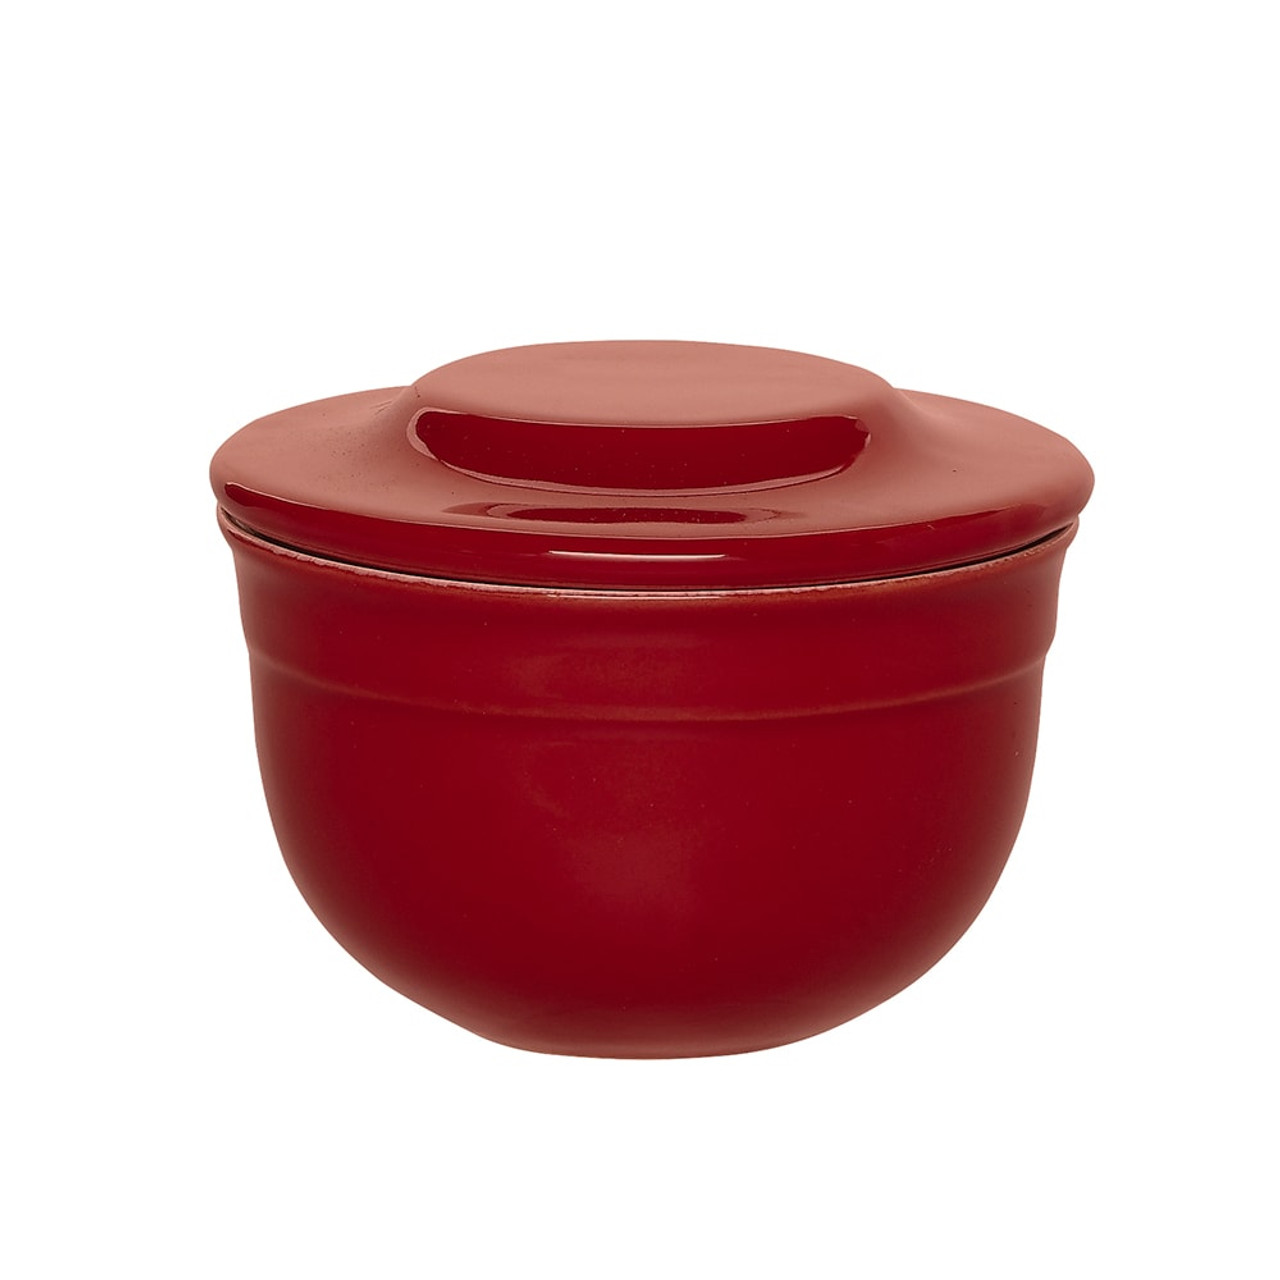 Ceramic Butter Dish Crock Big Capacity French Glass with lid Water Seal  Tray Holder- Red 